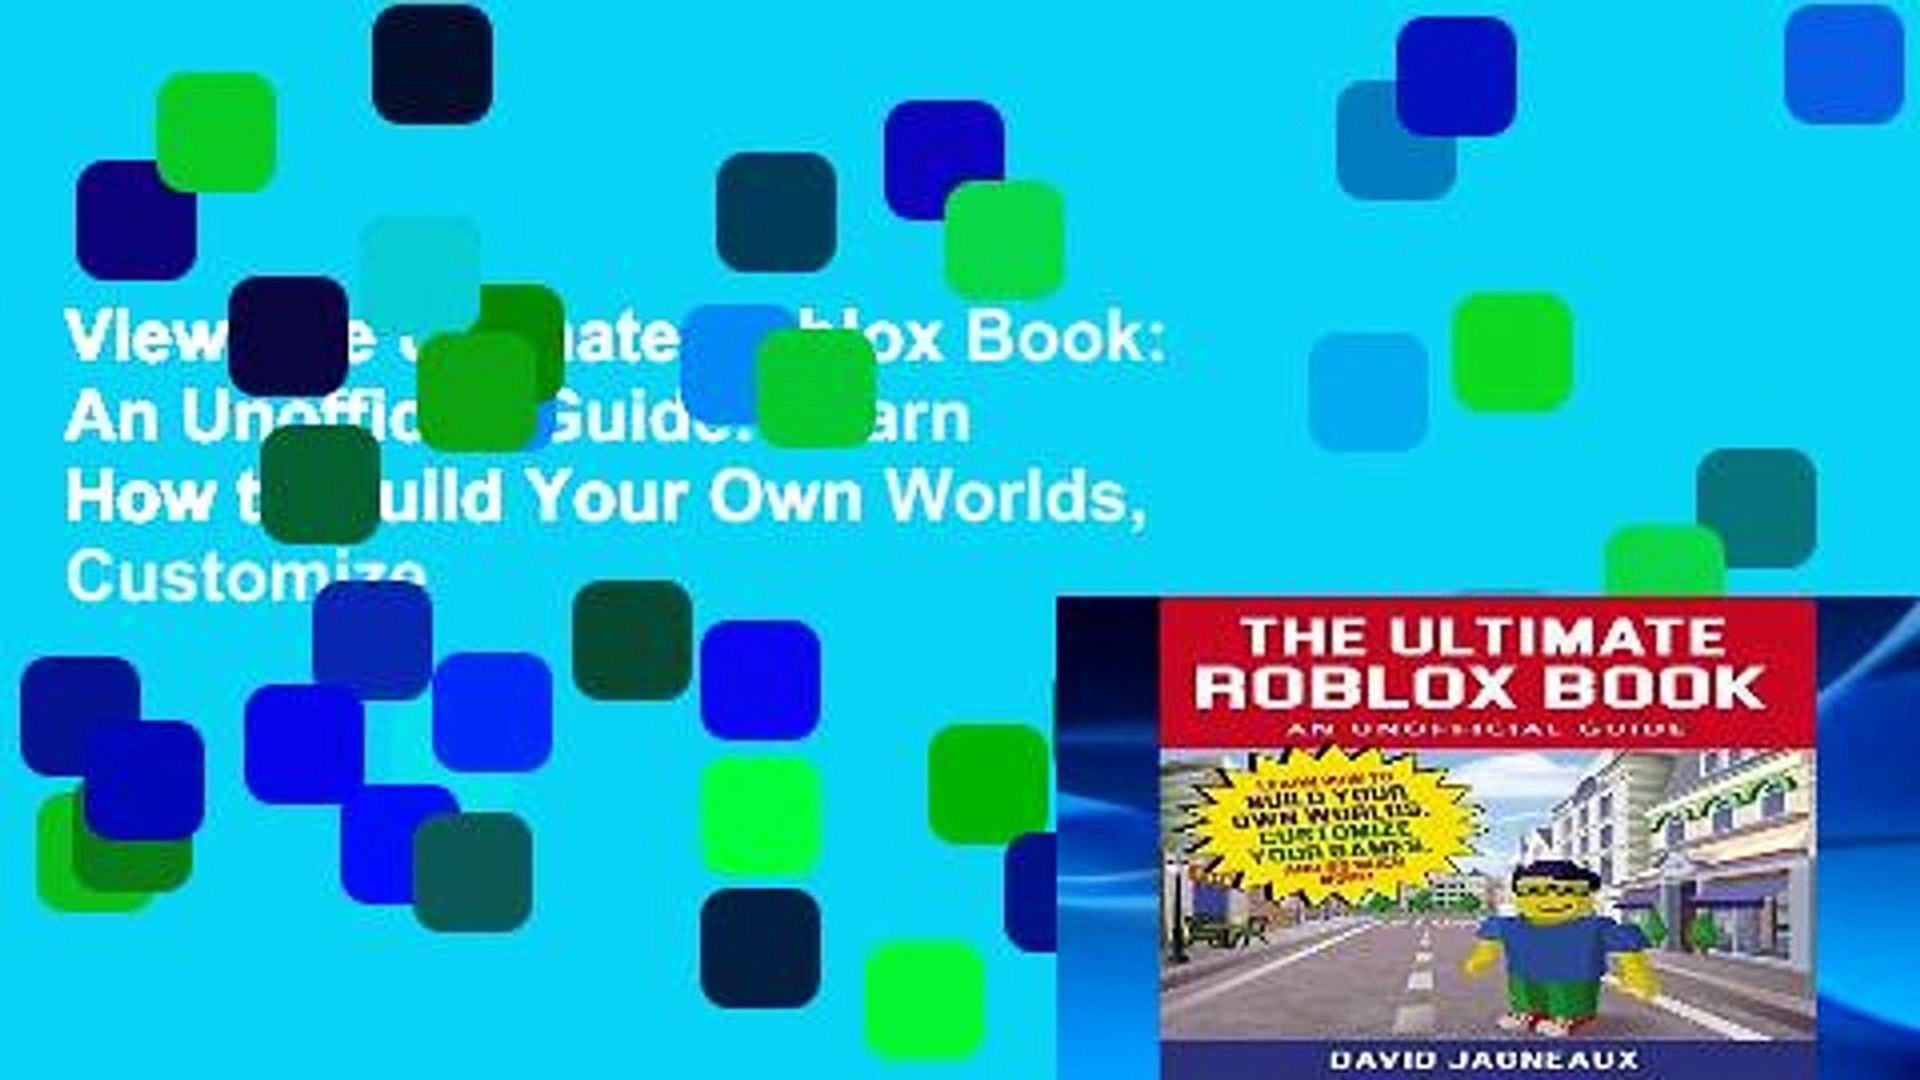 View The Ultimate Roblox Book An Unofficial Guide Learn How To Build Your Own Worlds Customize Video Dailymotion - file the ultimate roblox book an unofficial guide learn